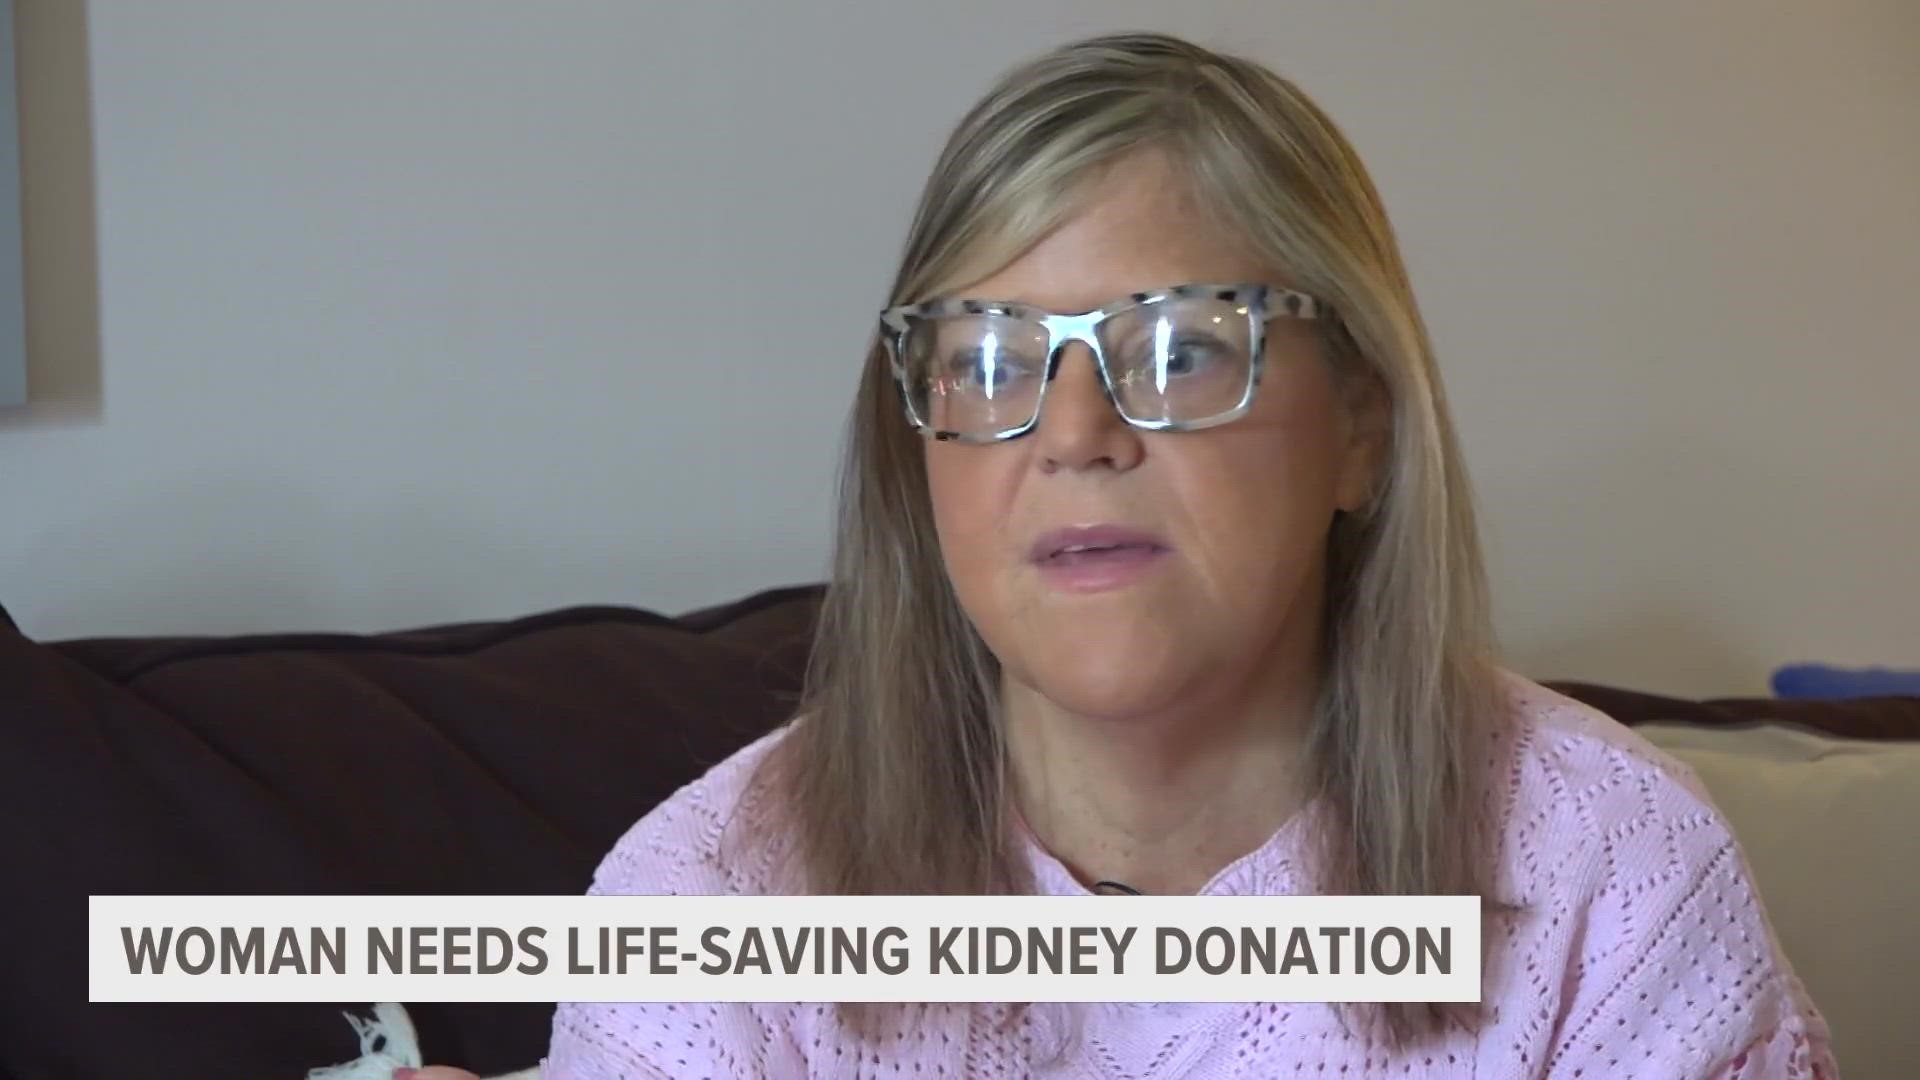 A Grand Rapids woman is asking for the public's help to save her life. She needs a new kidney and is worried her body may fail before she finds one.